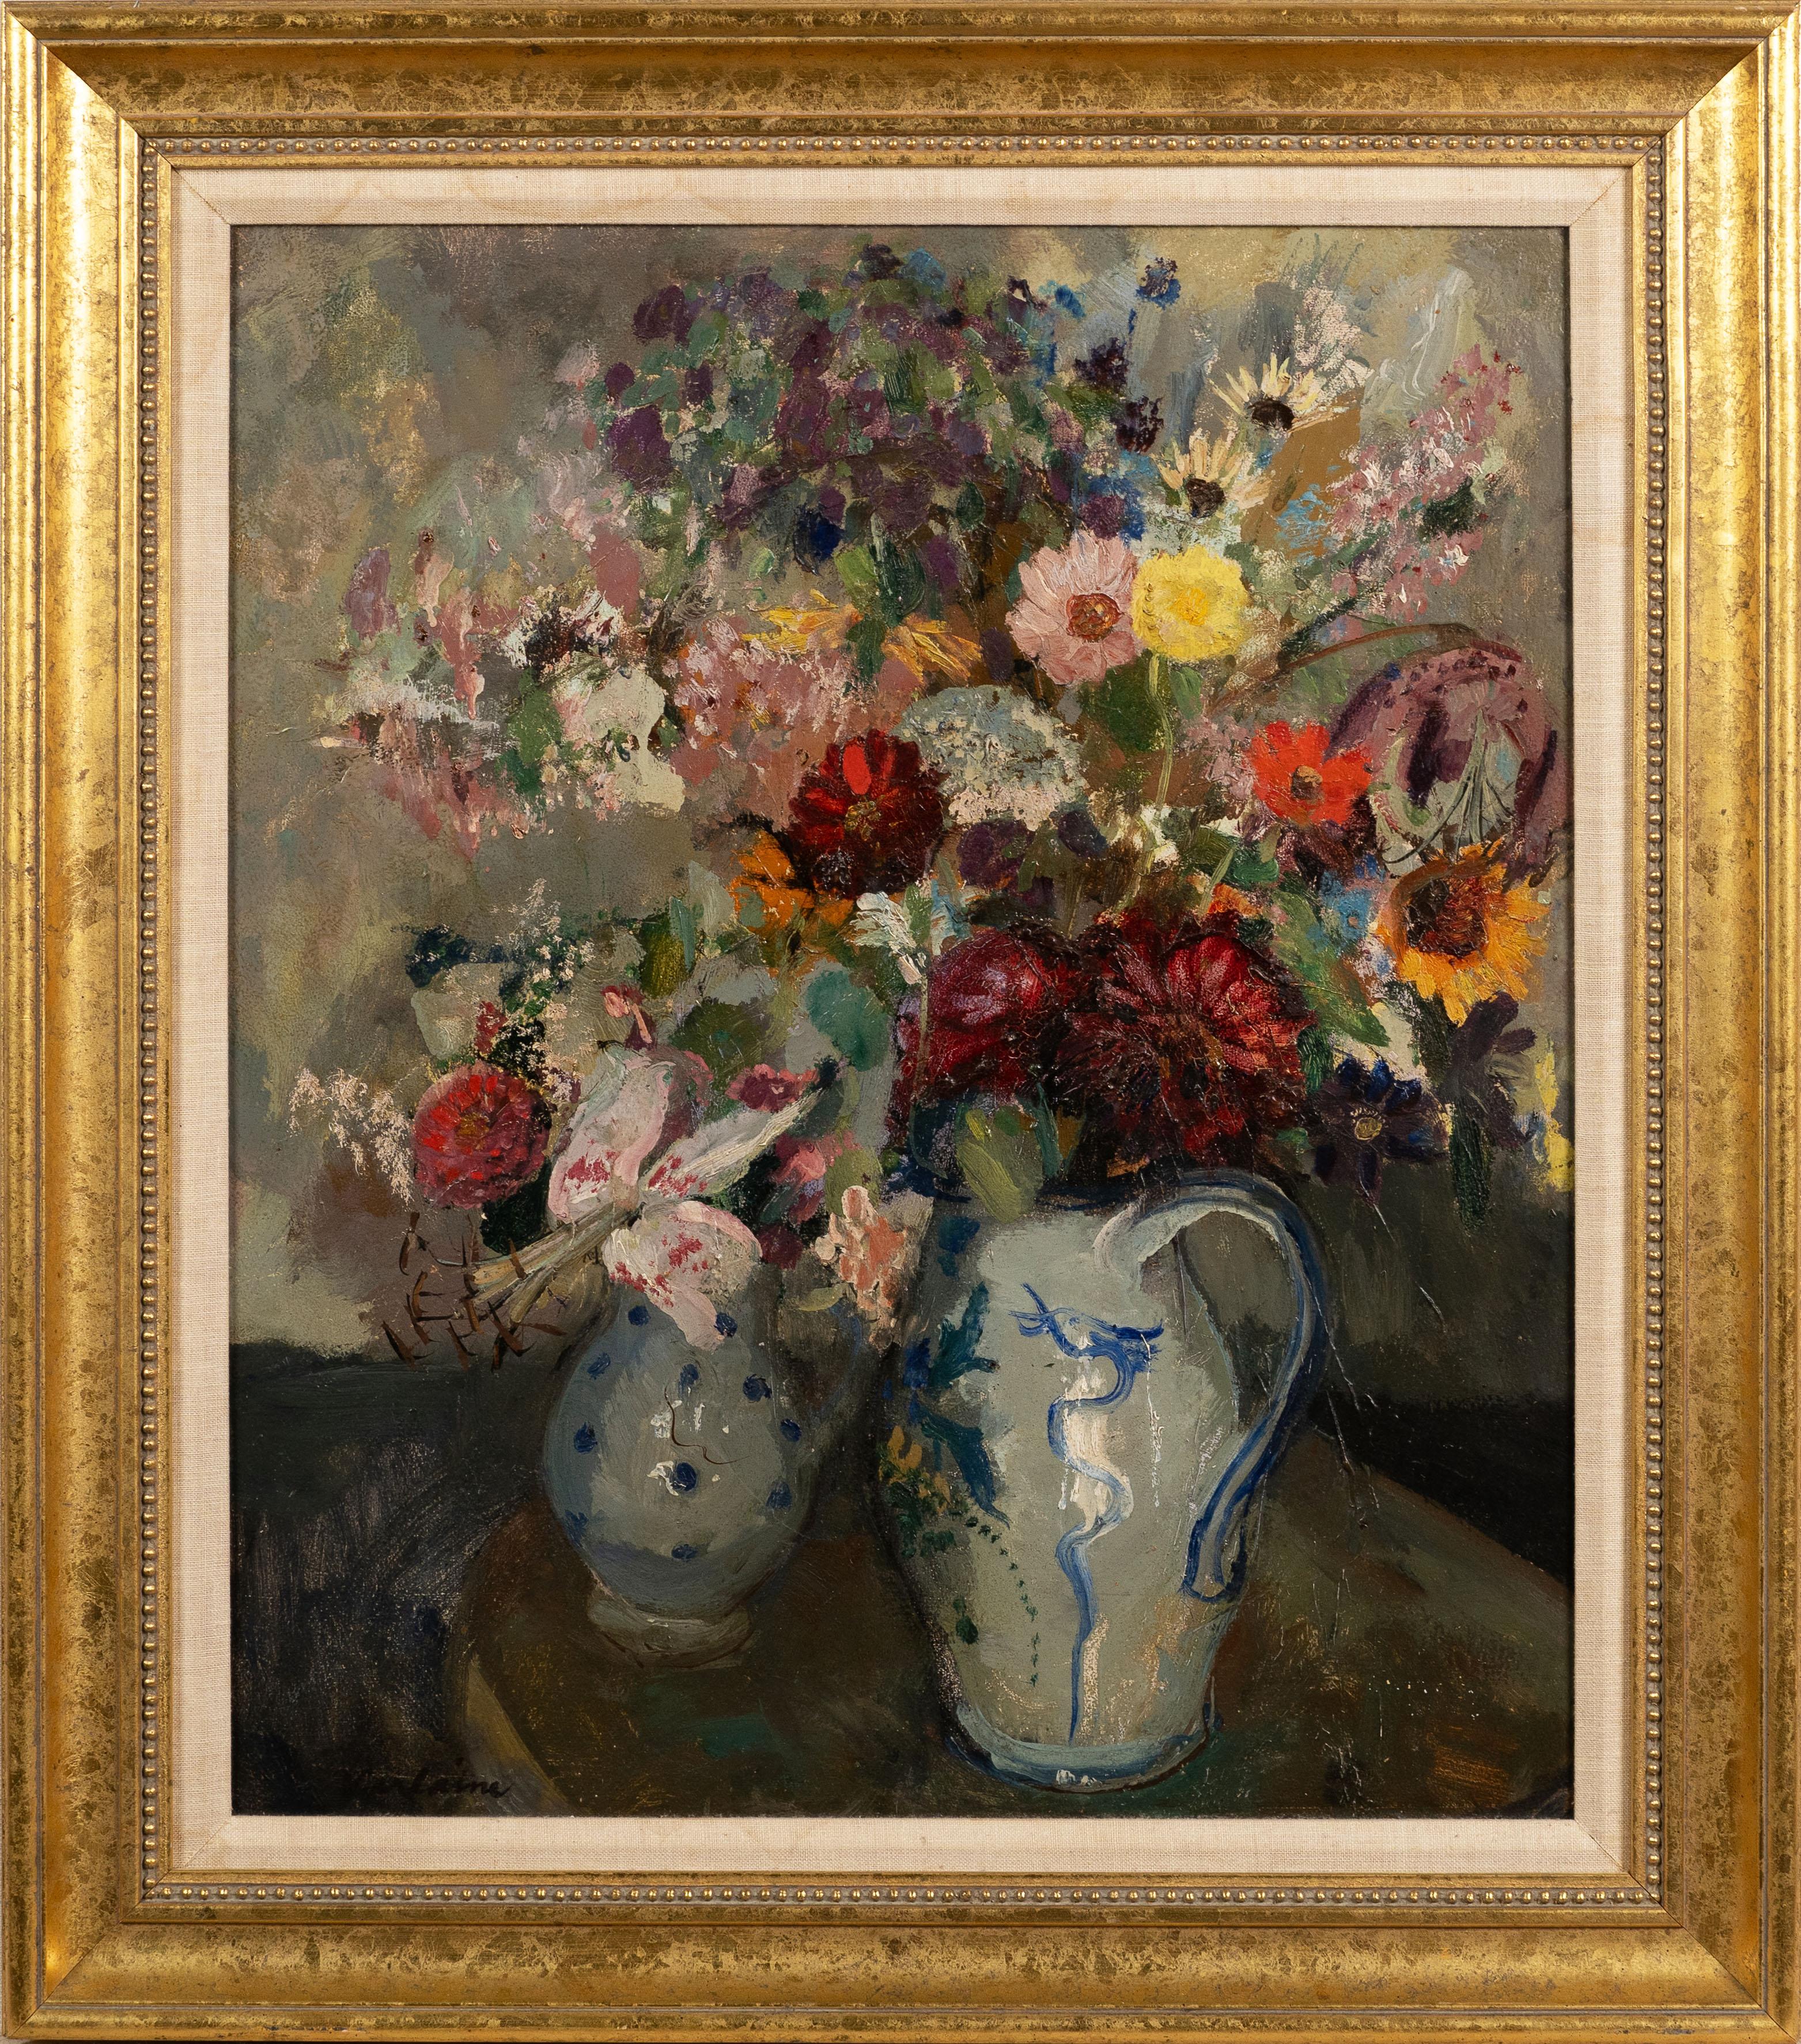 Unknown Interior Painting - Large Finely Painted American Impressionist Still Life Signed Framed Painting